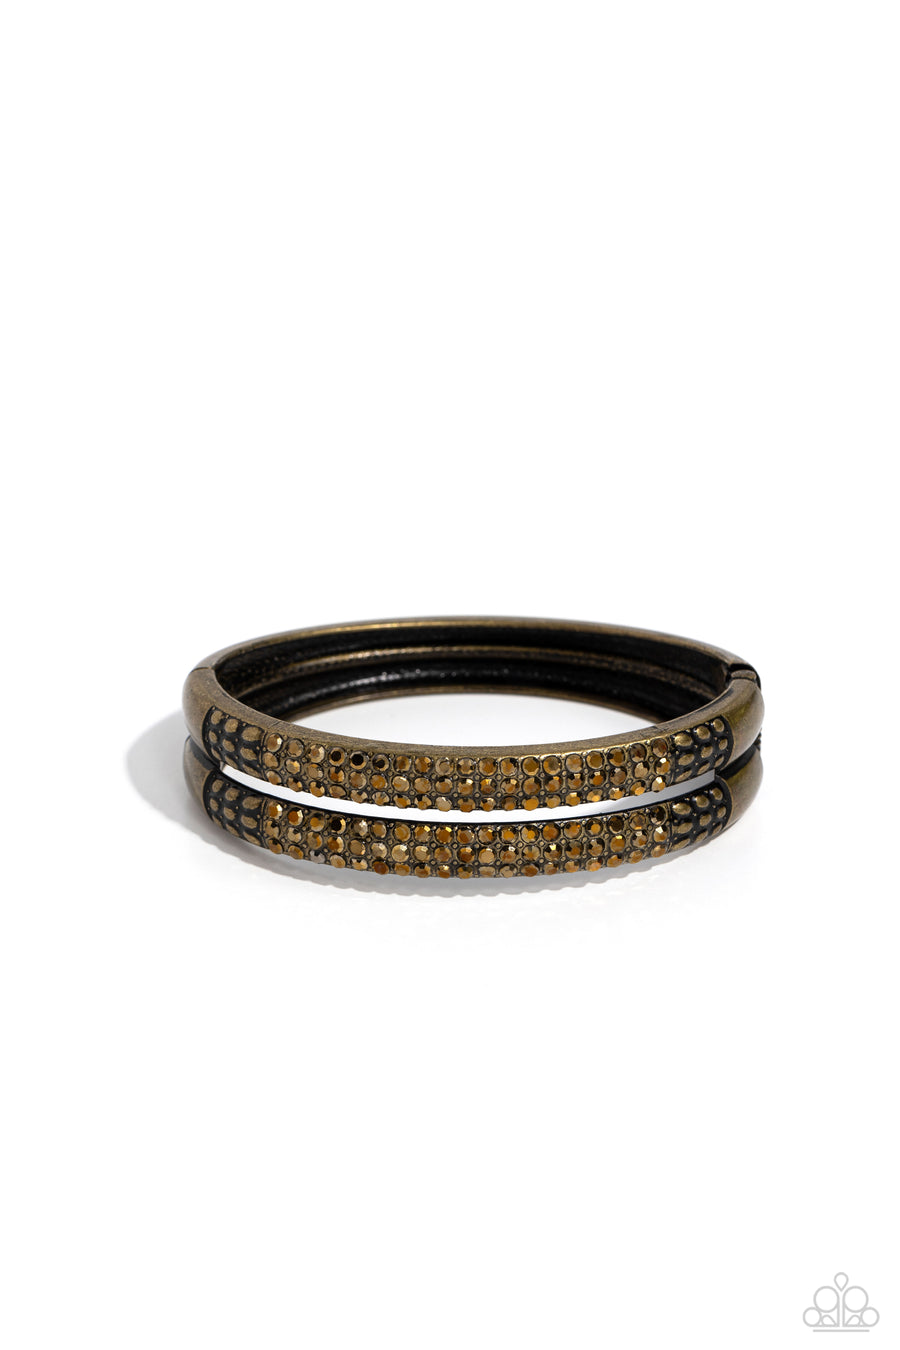 STACKED Up - Brass Bracelet - Paparazzi Accessories - Three rows of dainty aurum rhinestones are encrusted along two thick brass layers as they stack upon the wrist. Rows of studded brass in a dot-motif border the glittery design for additional texture on the industrial showstopper.